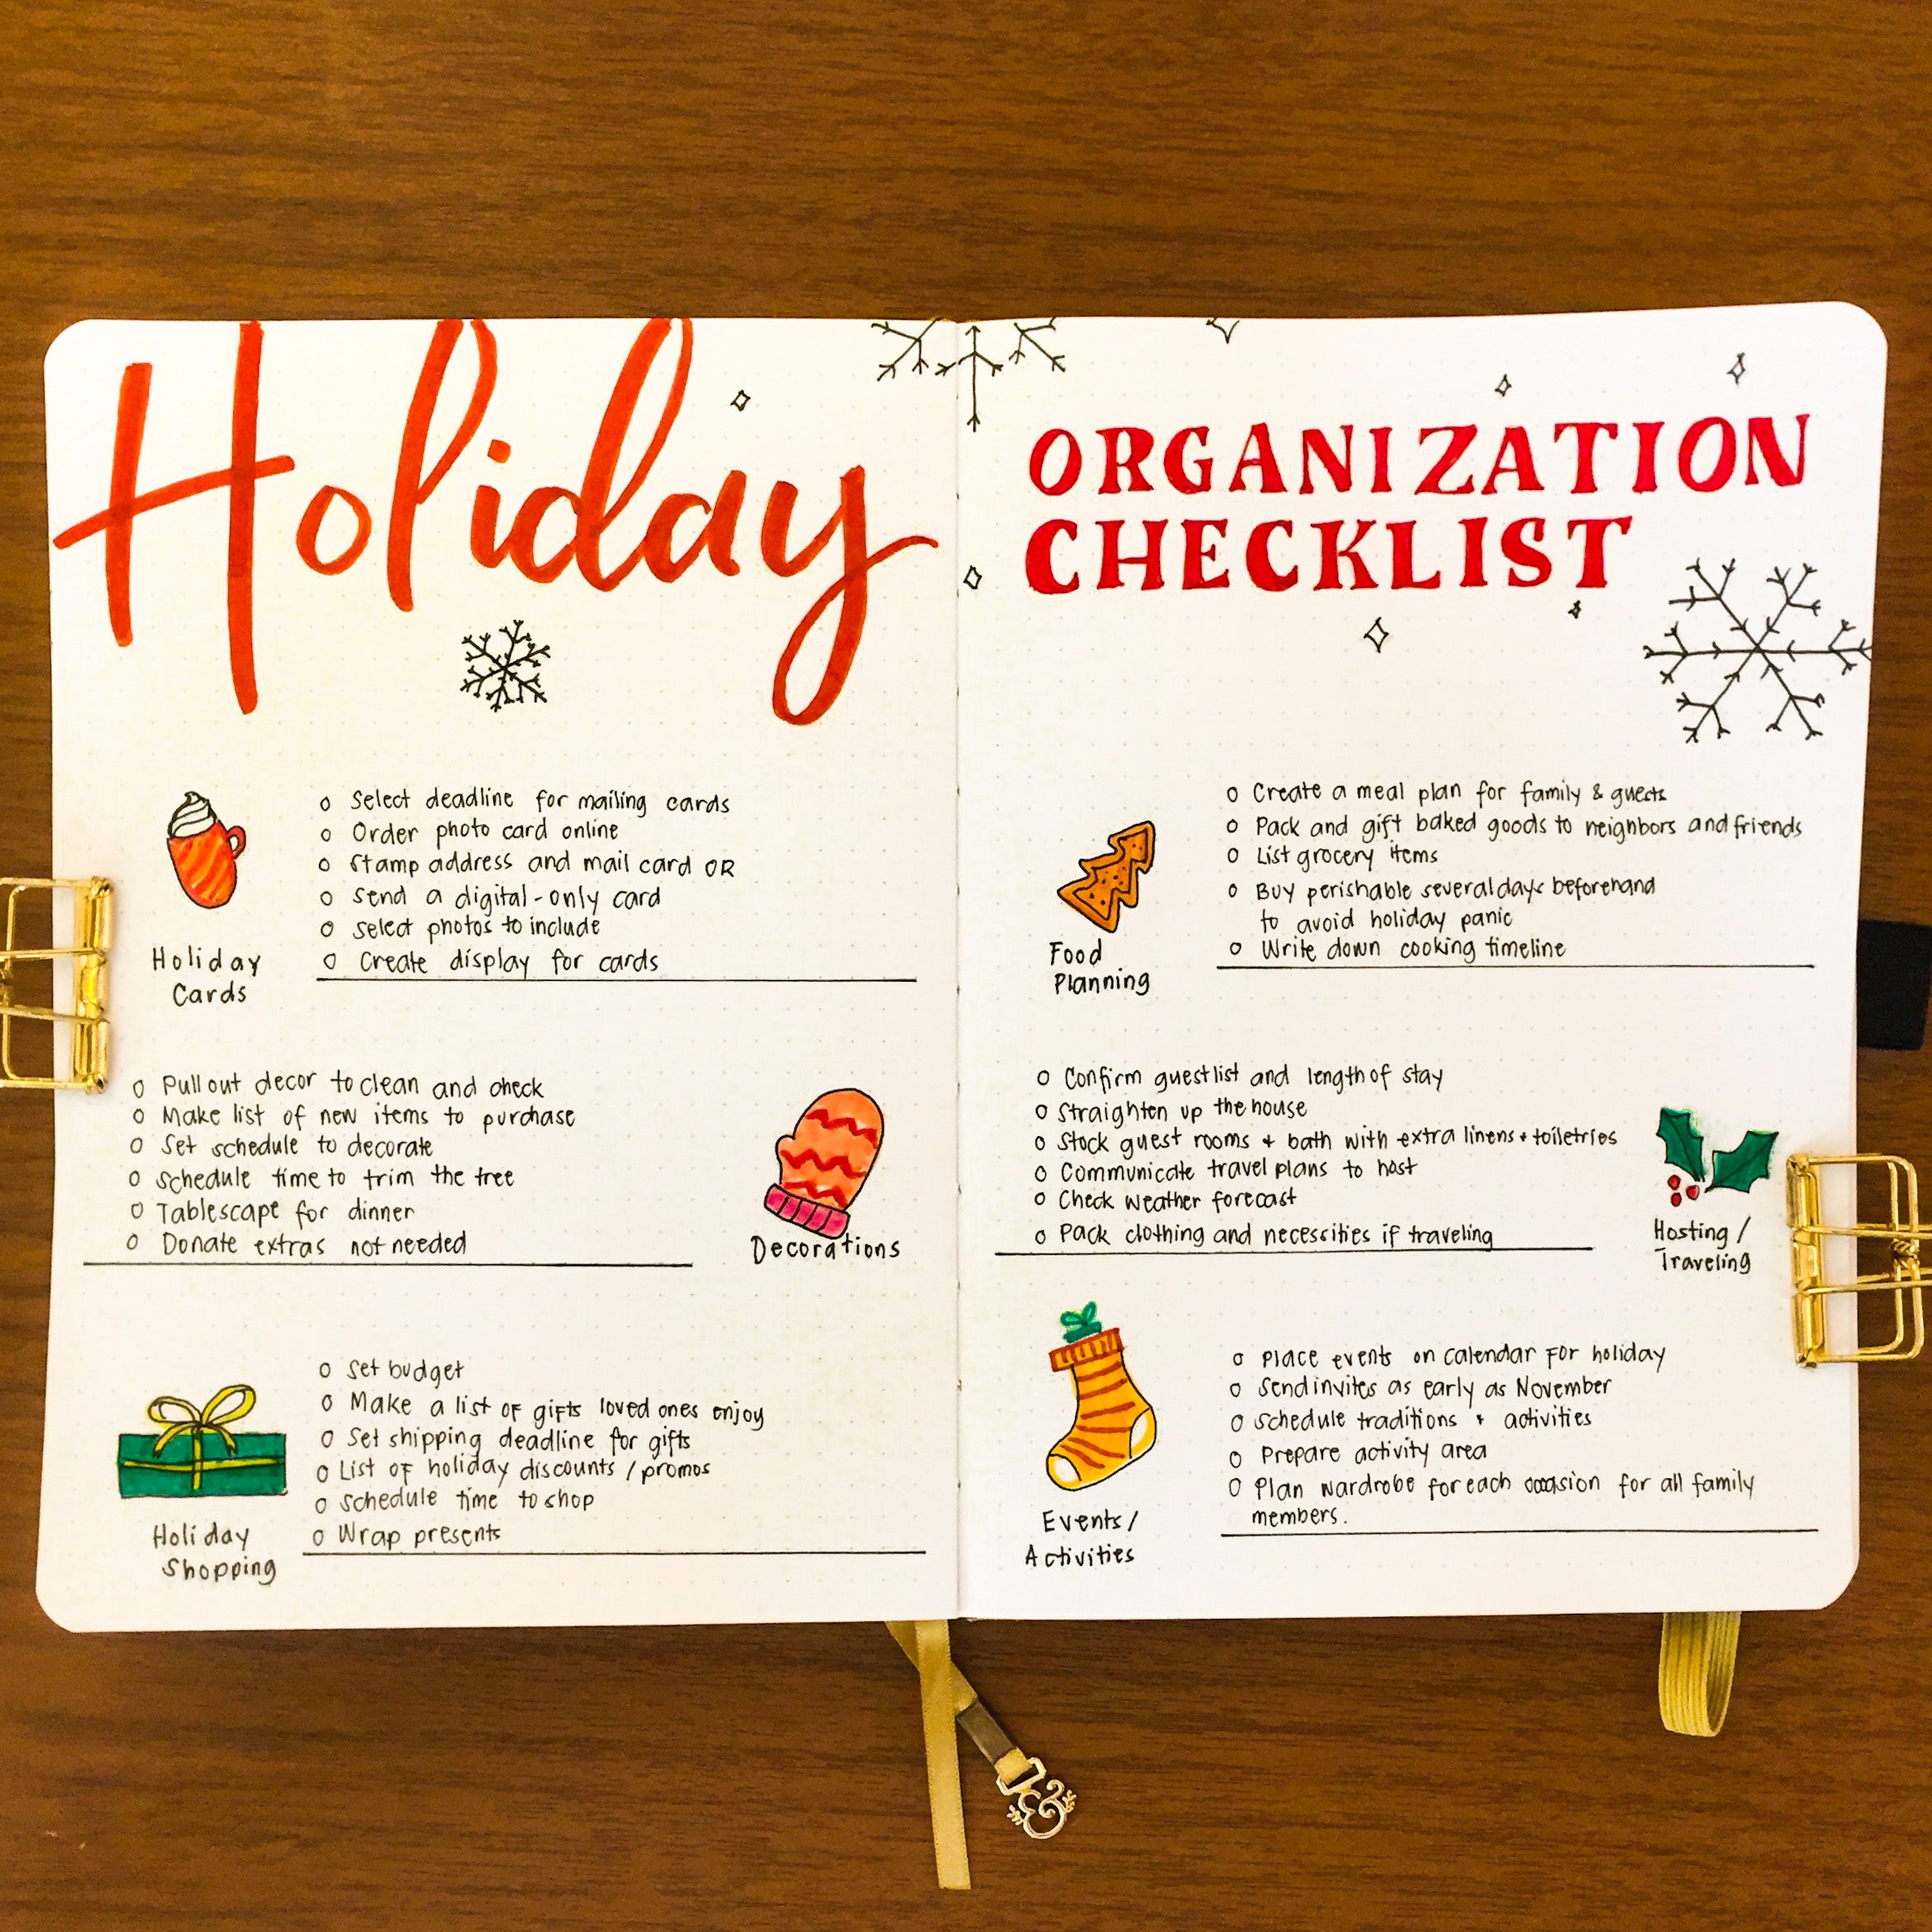 The Complete Checklist to Prepare Rooms for Holiday Guests